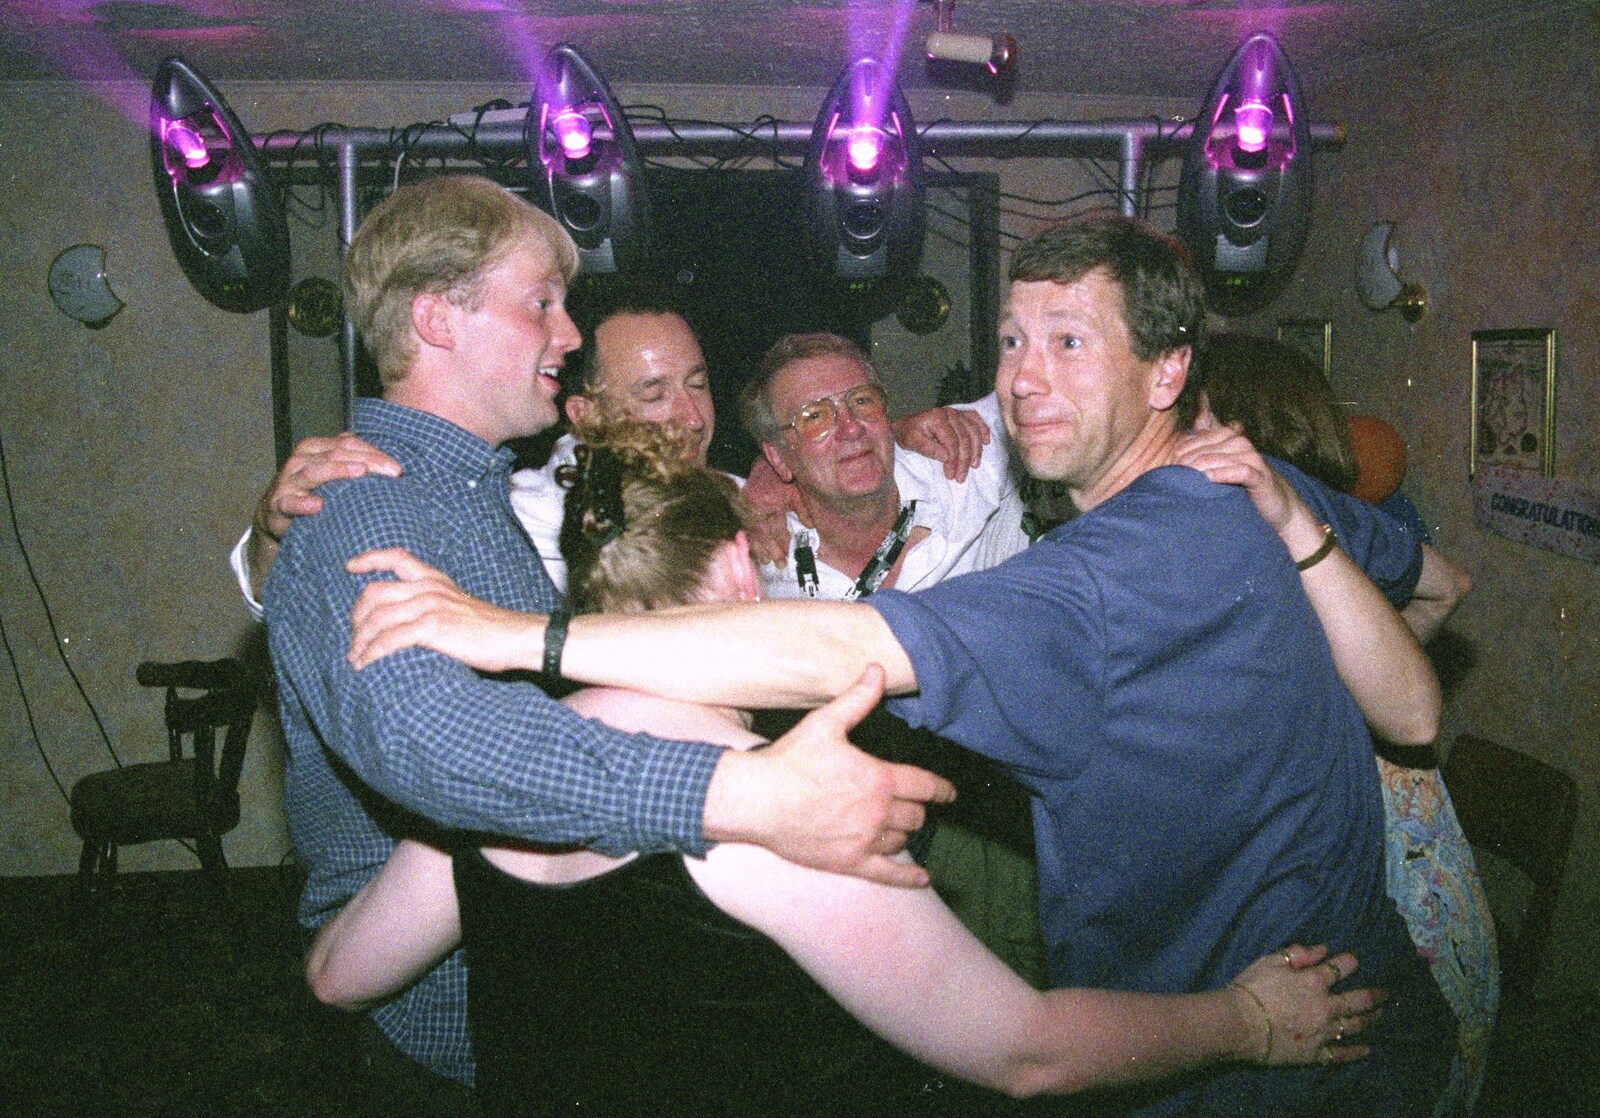 Another group hug moment from Lorraine's 21st Birthday, The Swan, Suffolk - 10th June 2000